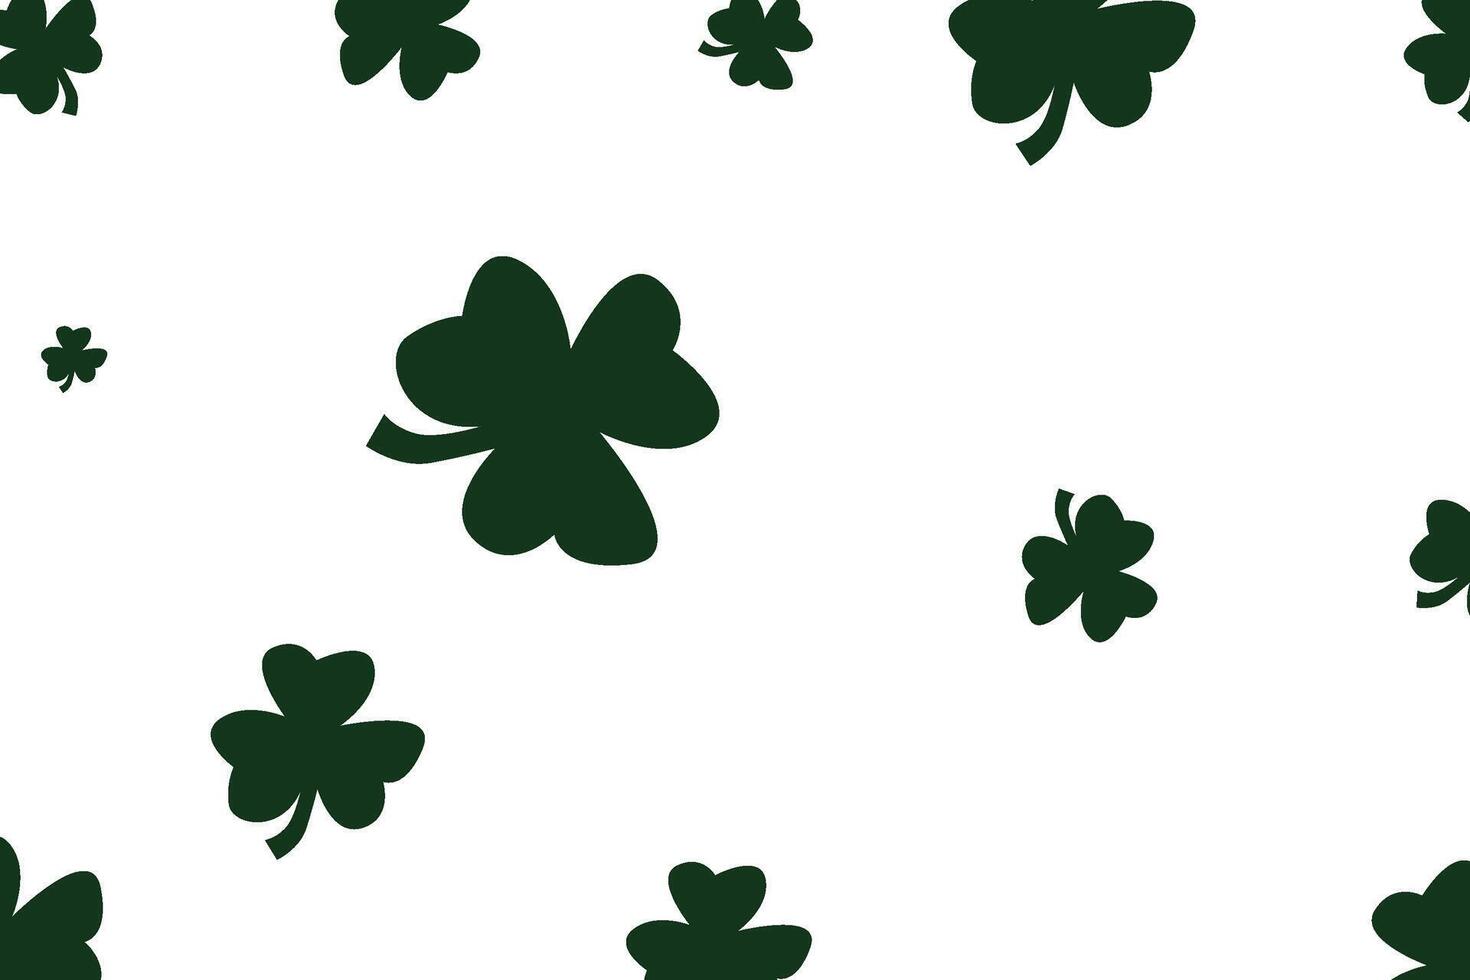 Falling Four Leaf Clovers in various sizes are suitable for St. Patrick's Day celebrations, backgrounds and Irish design decorations vector